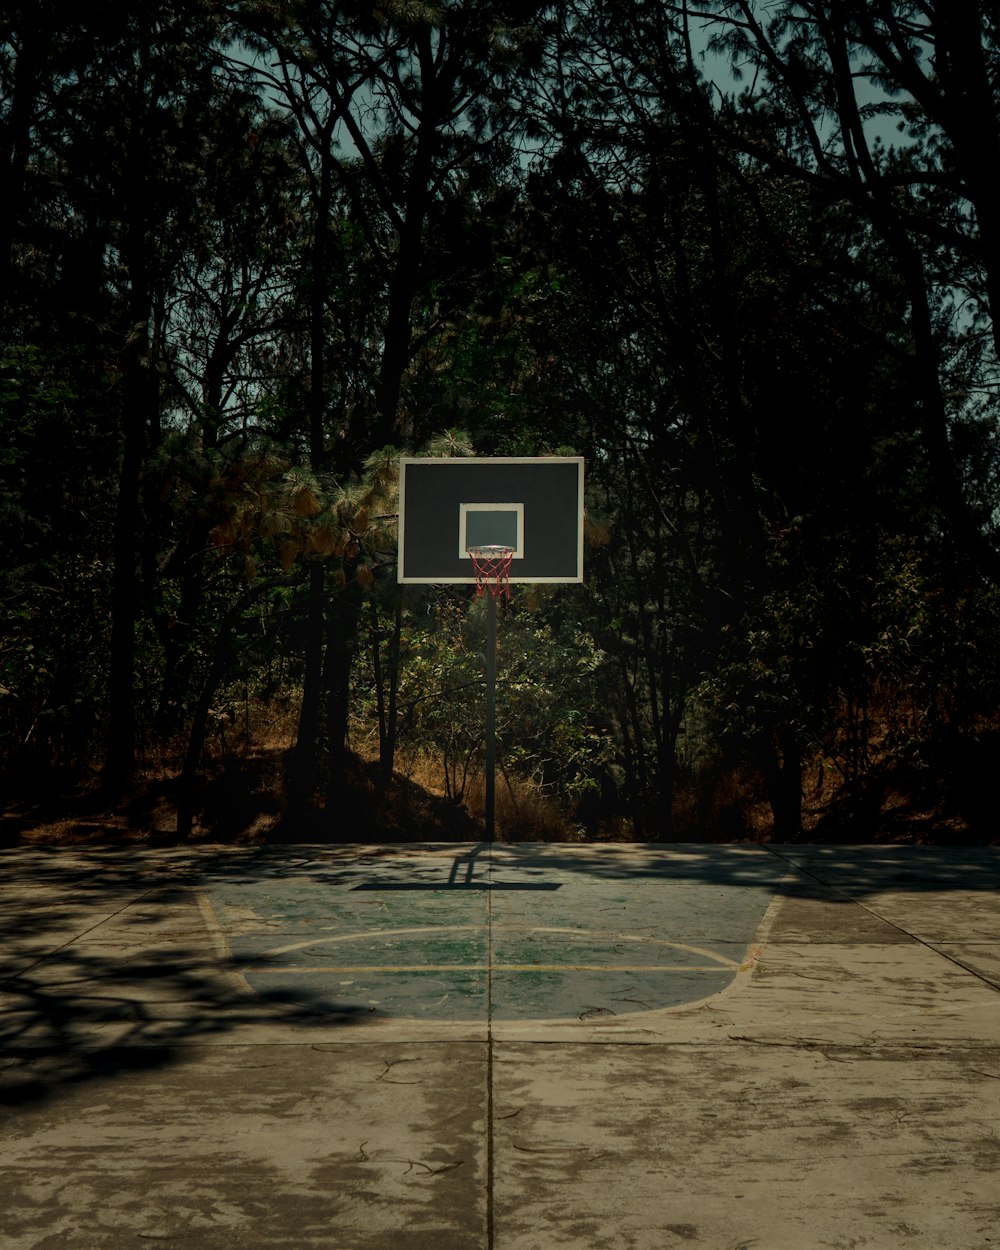 a basketball court in the middle of a wooded area